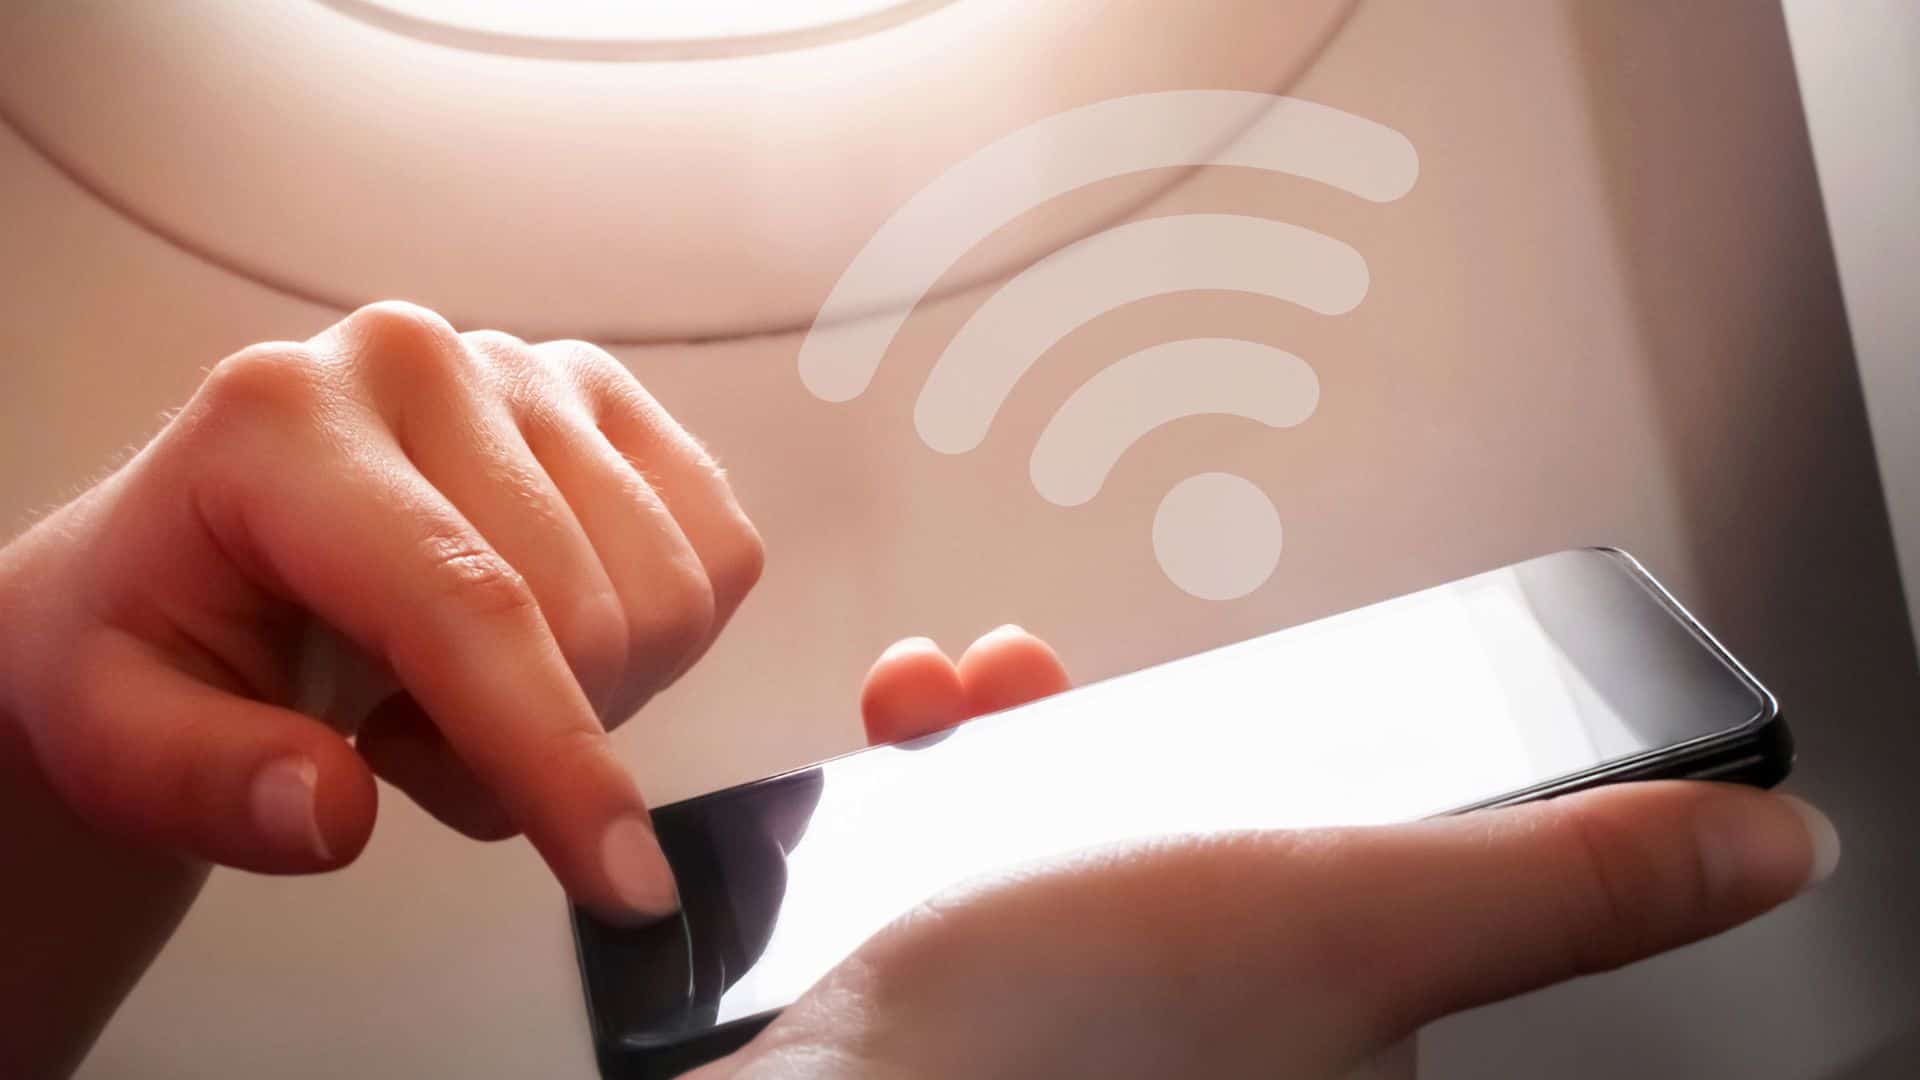 Can You Use Cellular Data on A Plane?